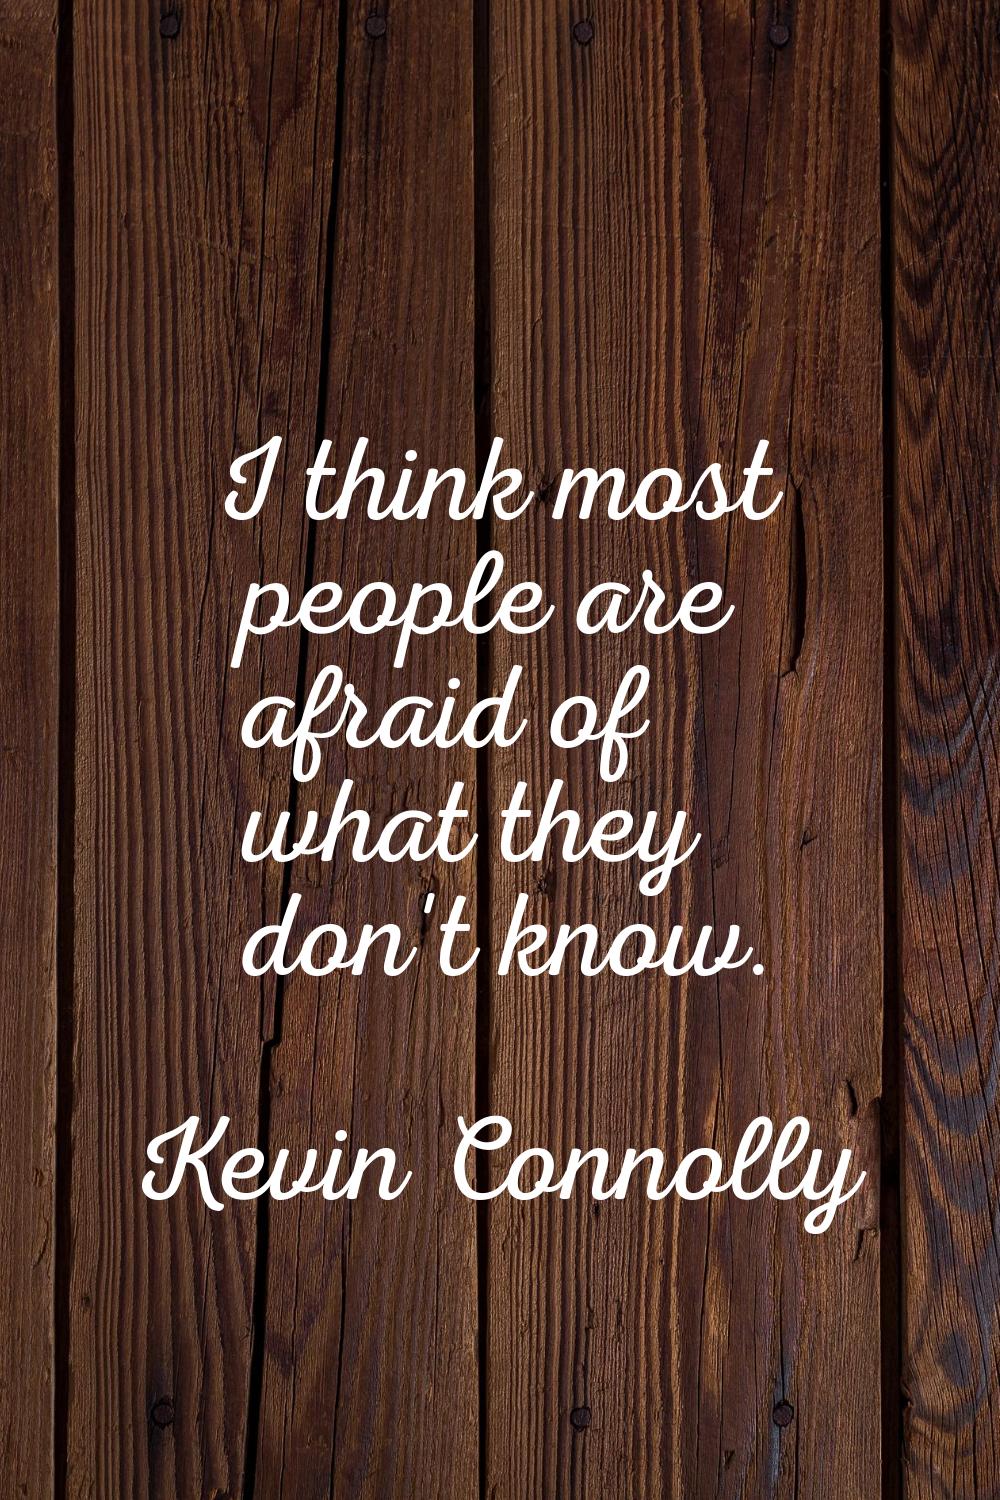 I think most people are afraid of what they don't know.